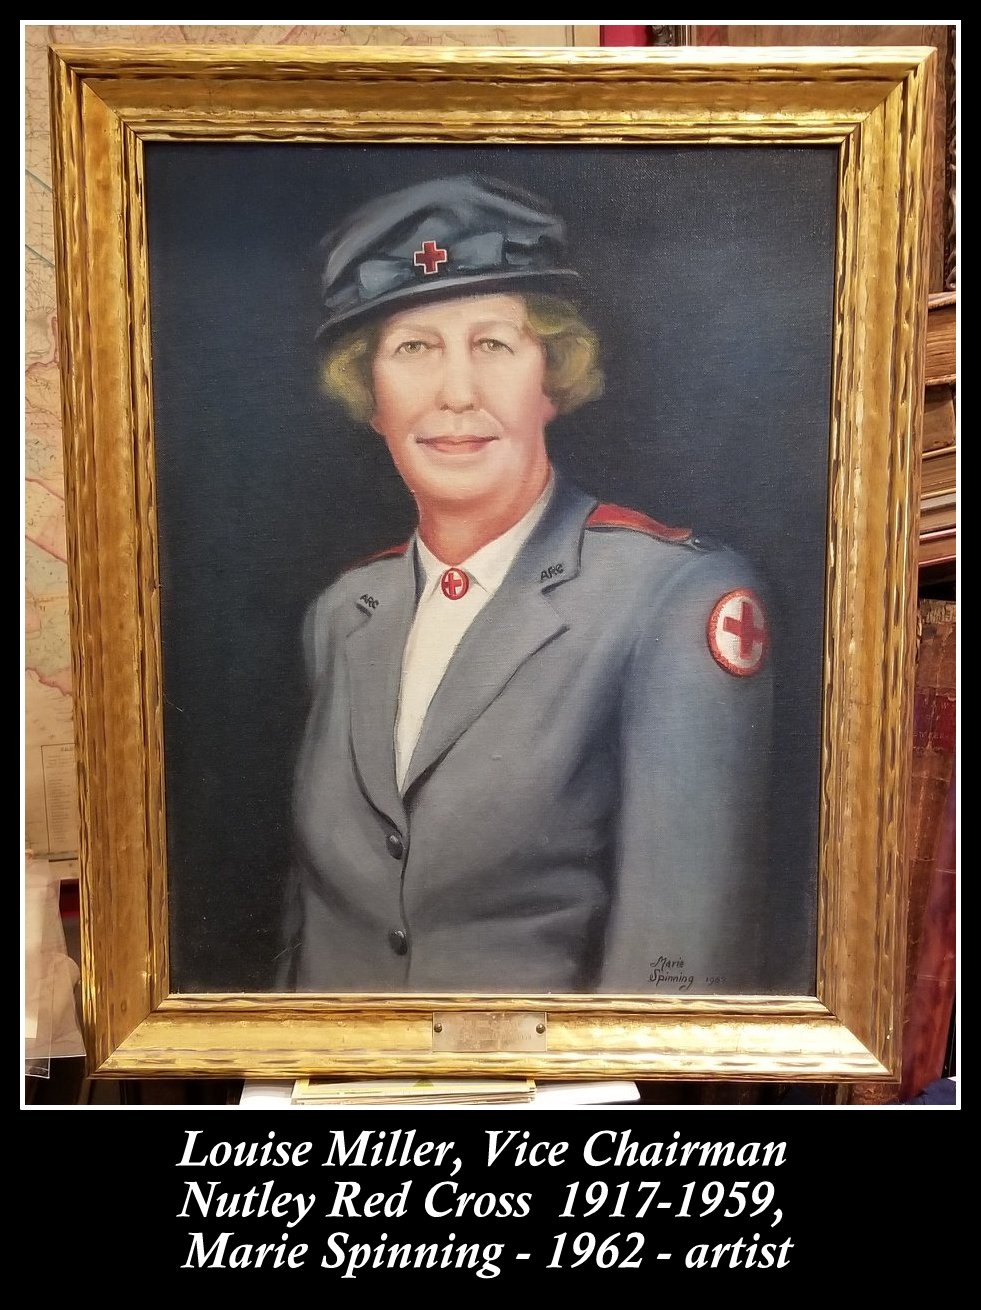 Red Cross vice-chairman portrait donated to Nutley Museum